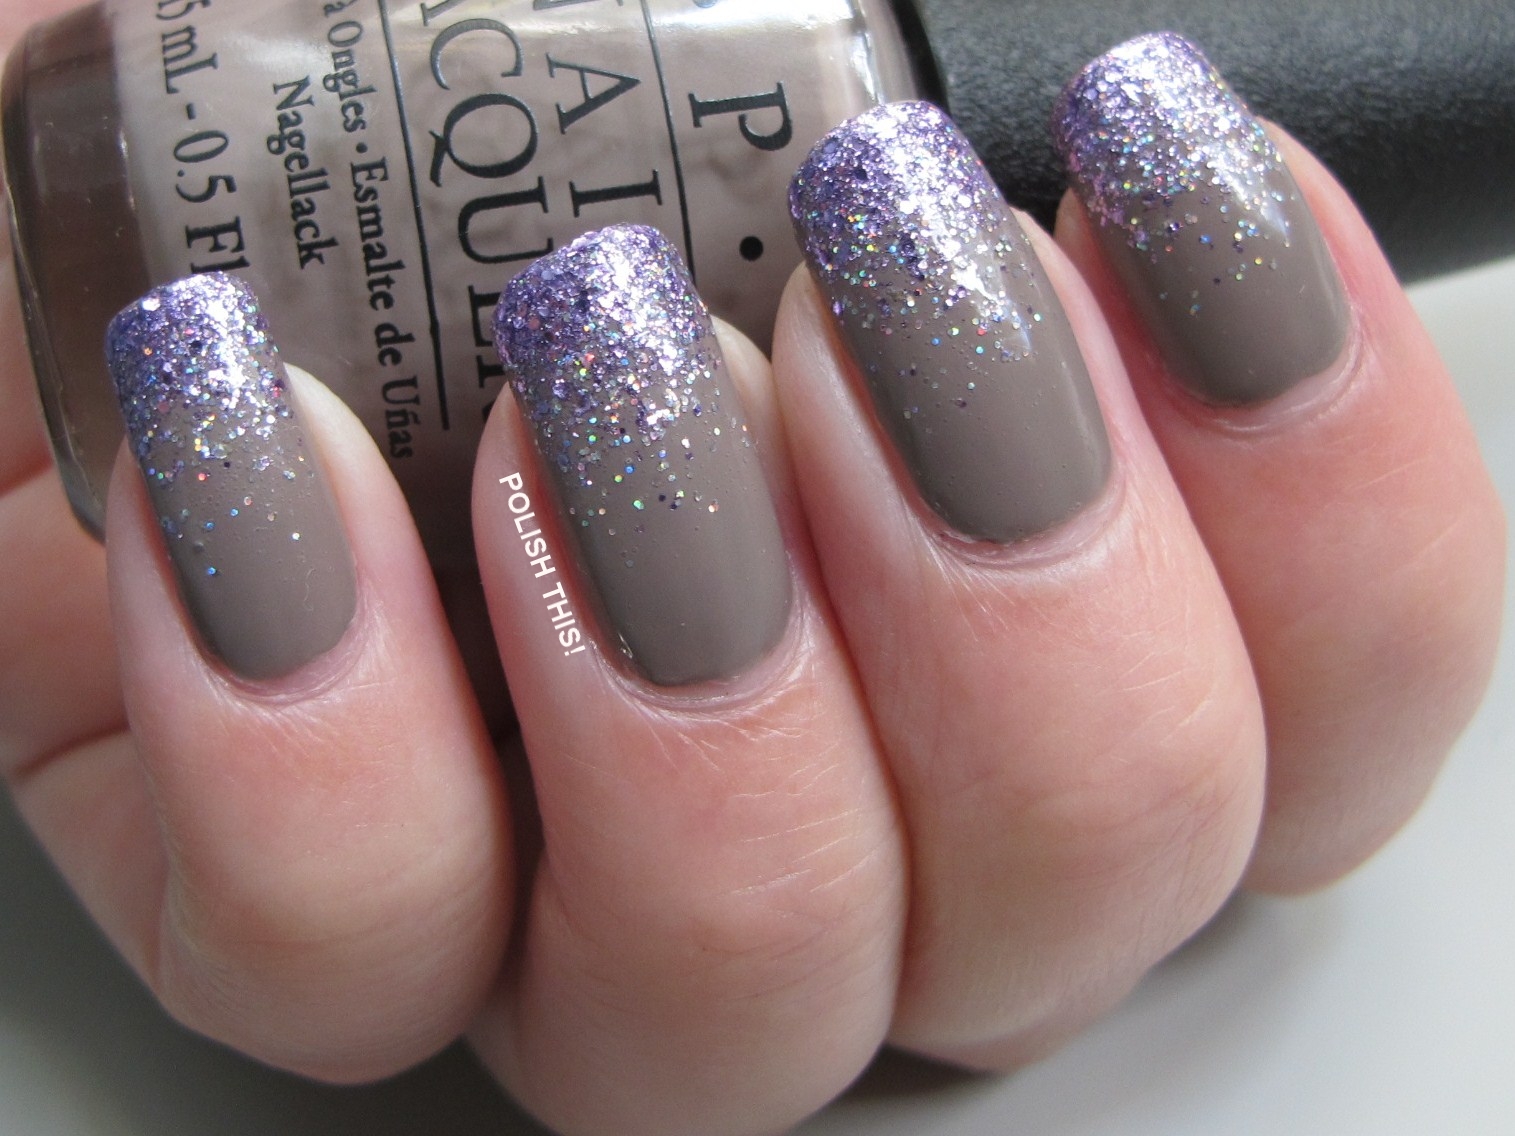 9. OPI "Berlin There Done That" - wide 5